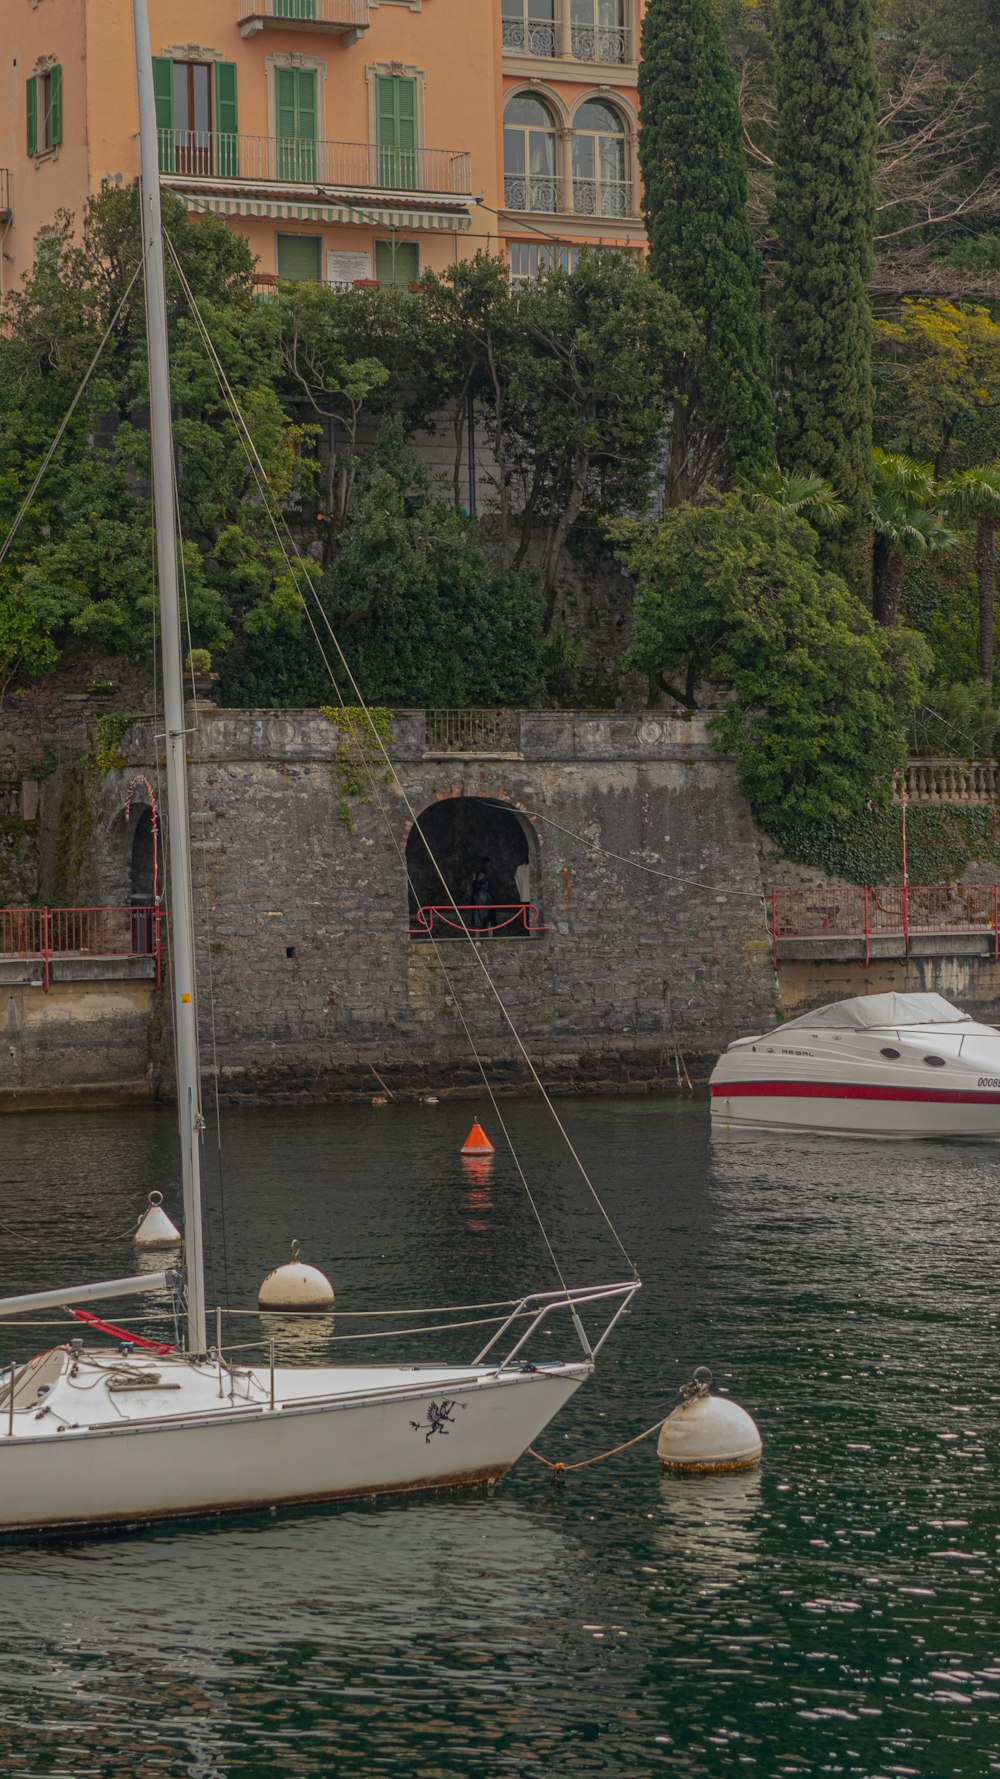 a sailboat in a body of water near a building